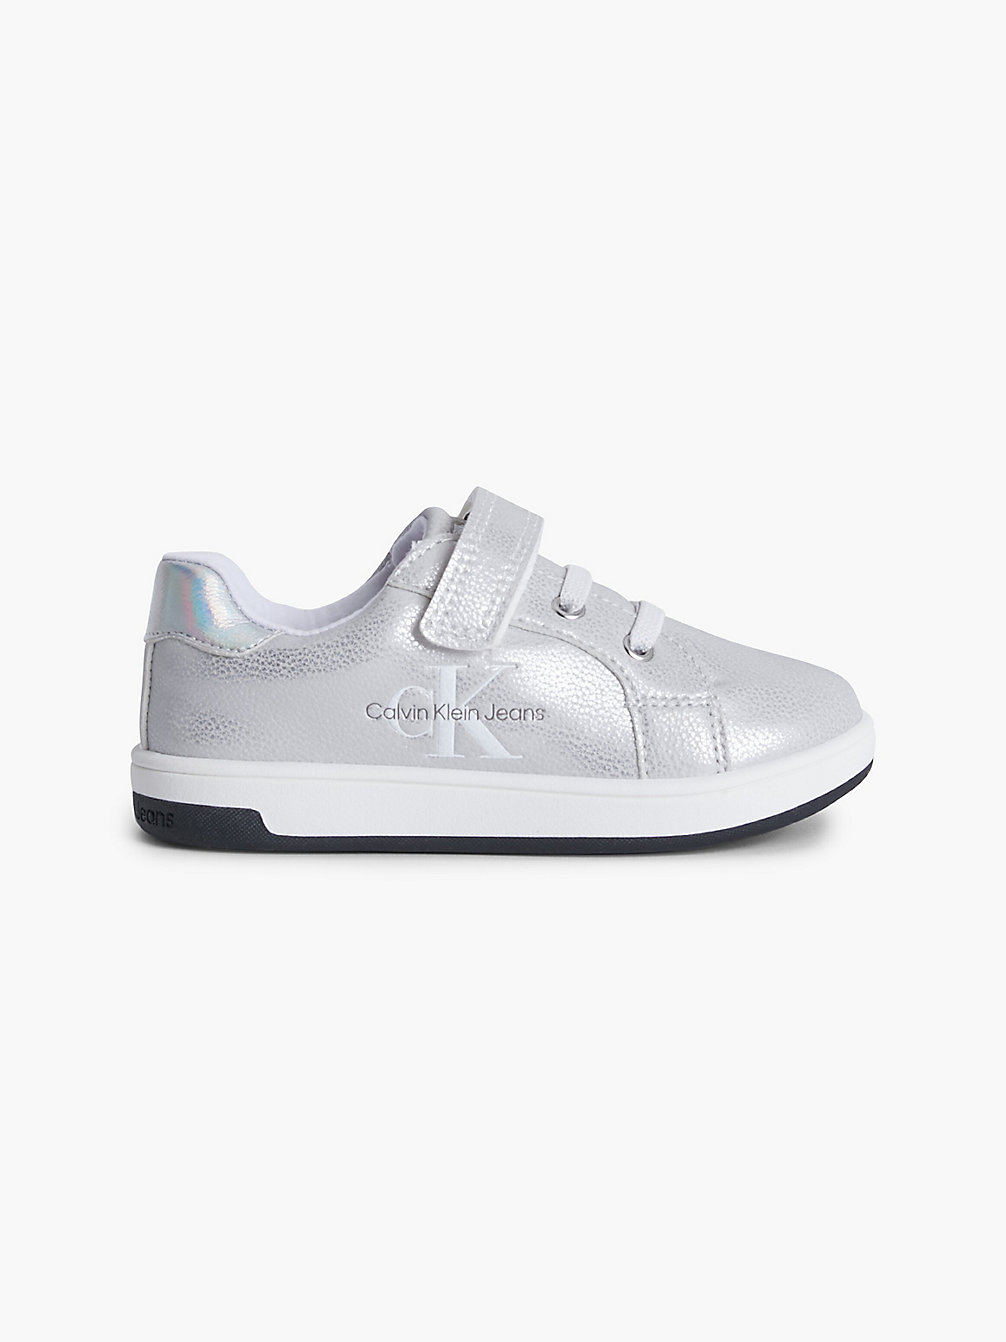 SILVER Recycled Toddlers-Kids Trainers undefined girls Calvin Klein